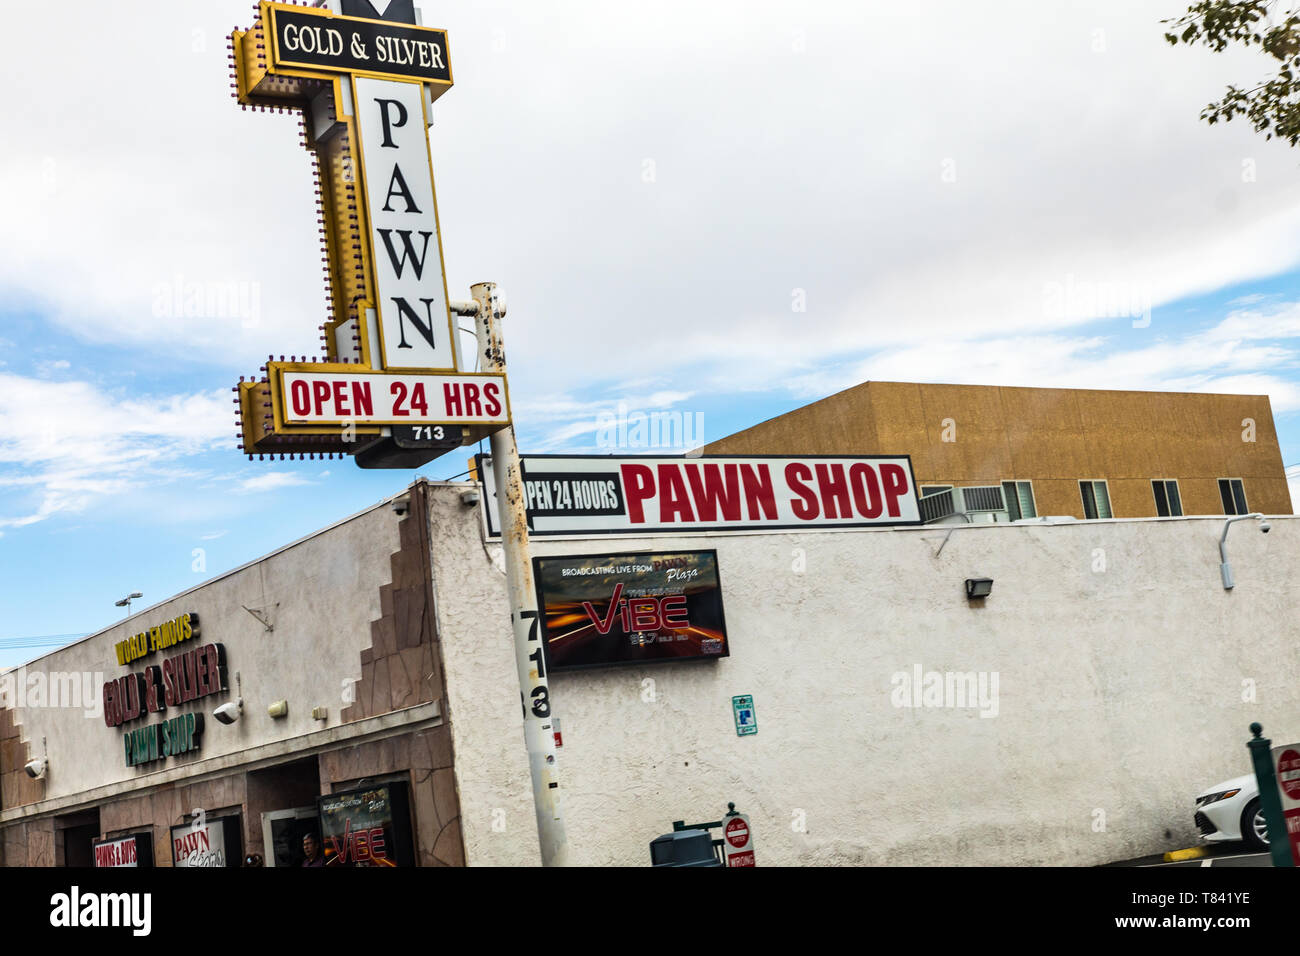 The Gold and Silver pawn shop made famous by the Pawn Stars TV show is a  Tourist attraction in Las Vegas Nevada USA Stock Photo - Alamy